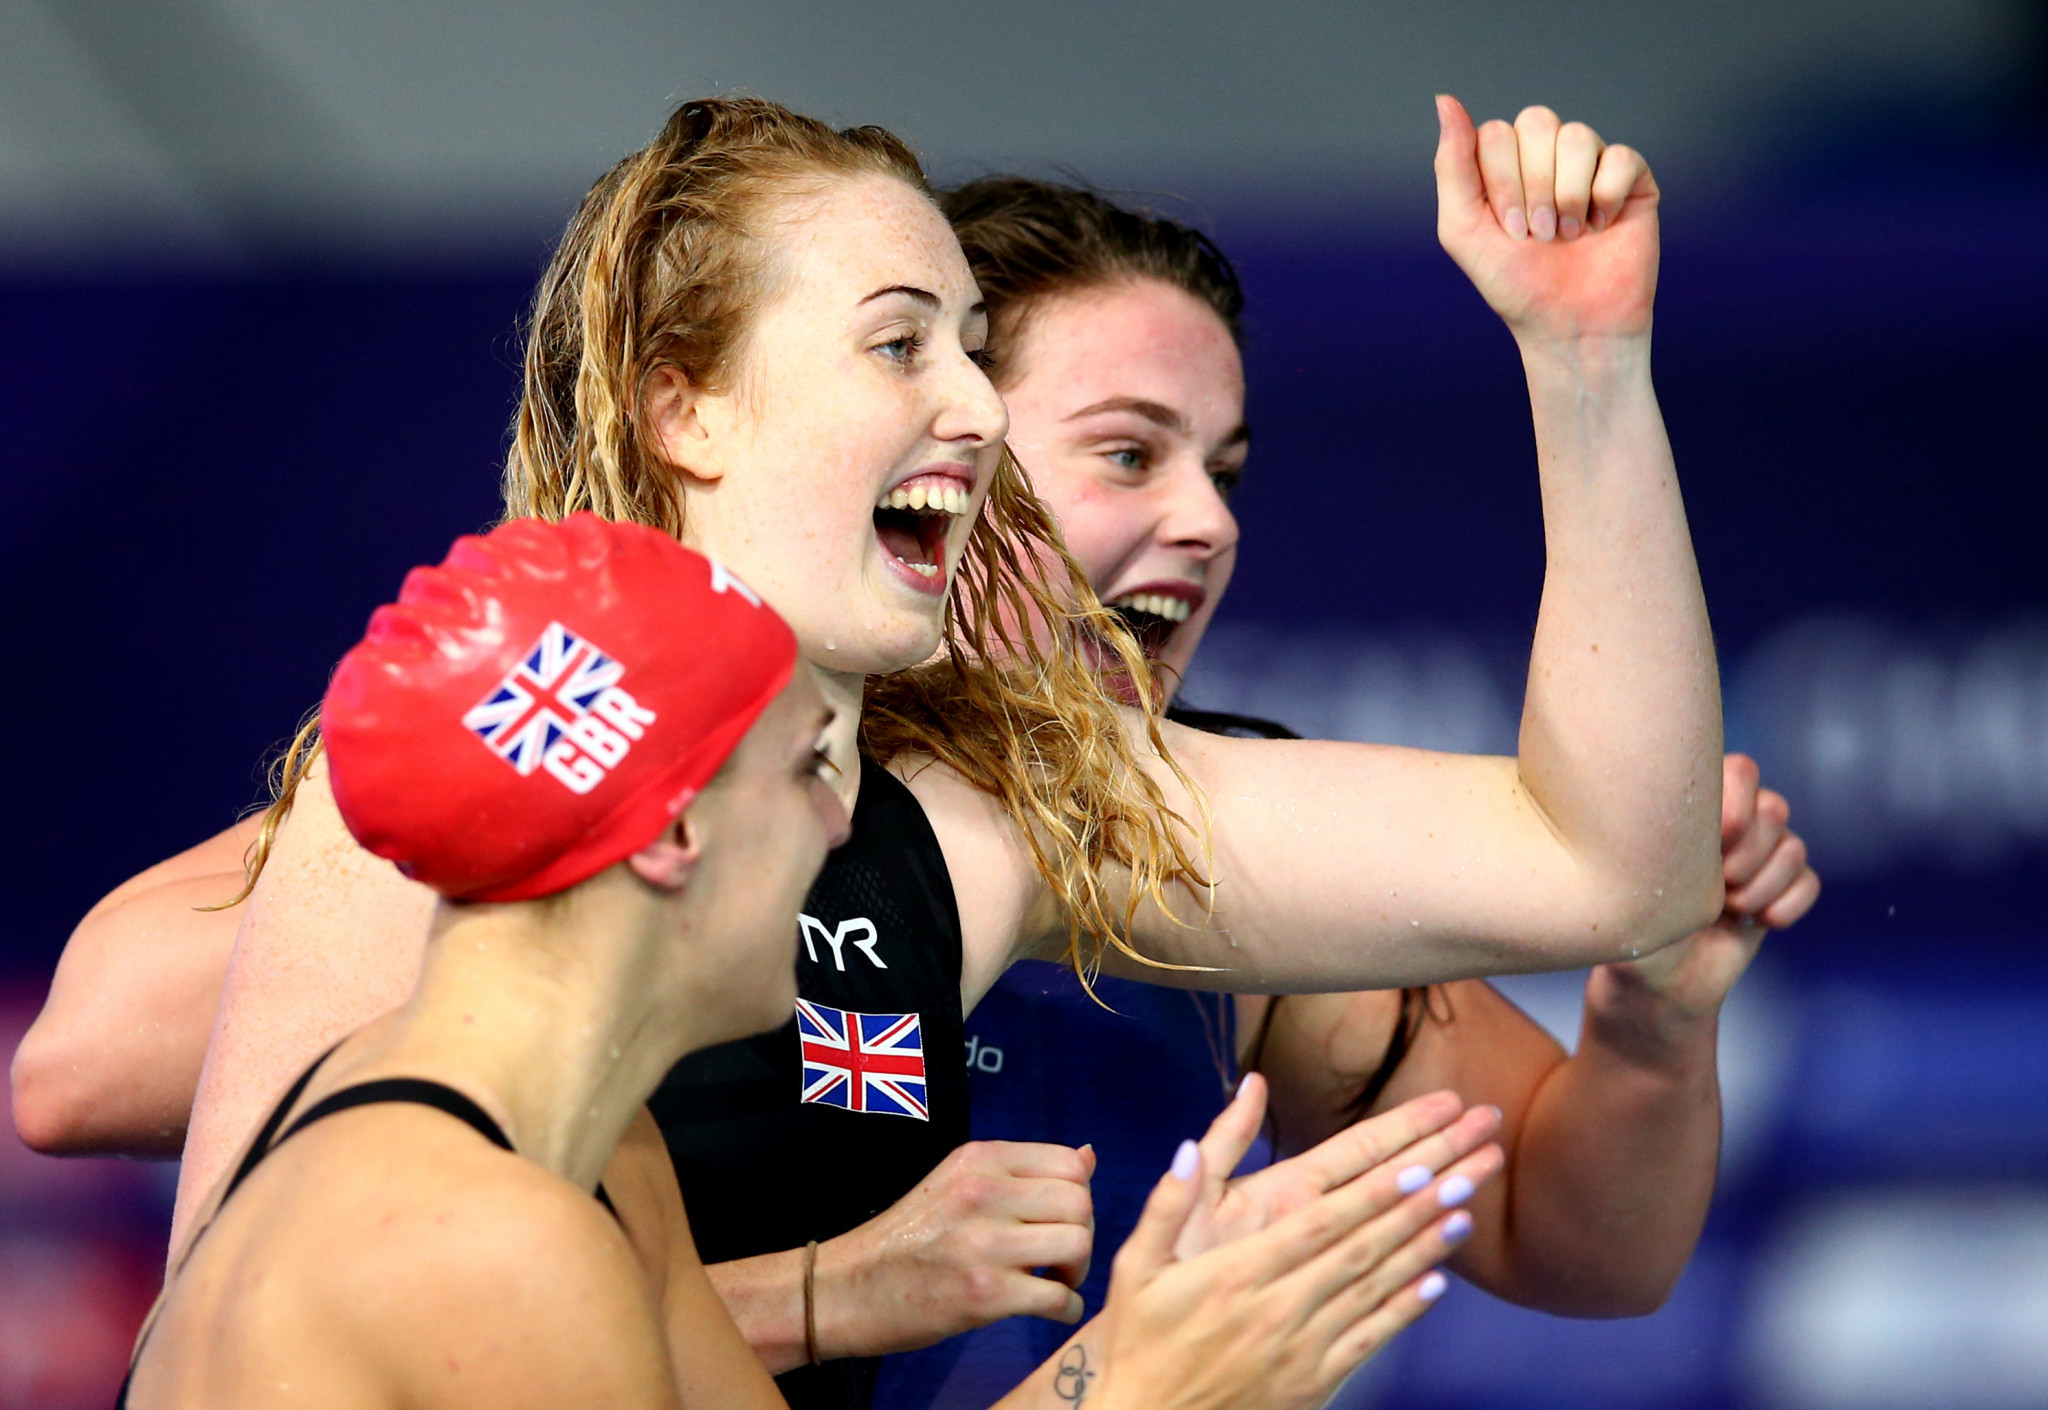 The final gold of the day was also claimed by the hosts. Great Britain won the women's 4x200m freestyle thanks to a surging swim from Freya Anderson in the last 30m ©Getty Images